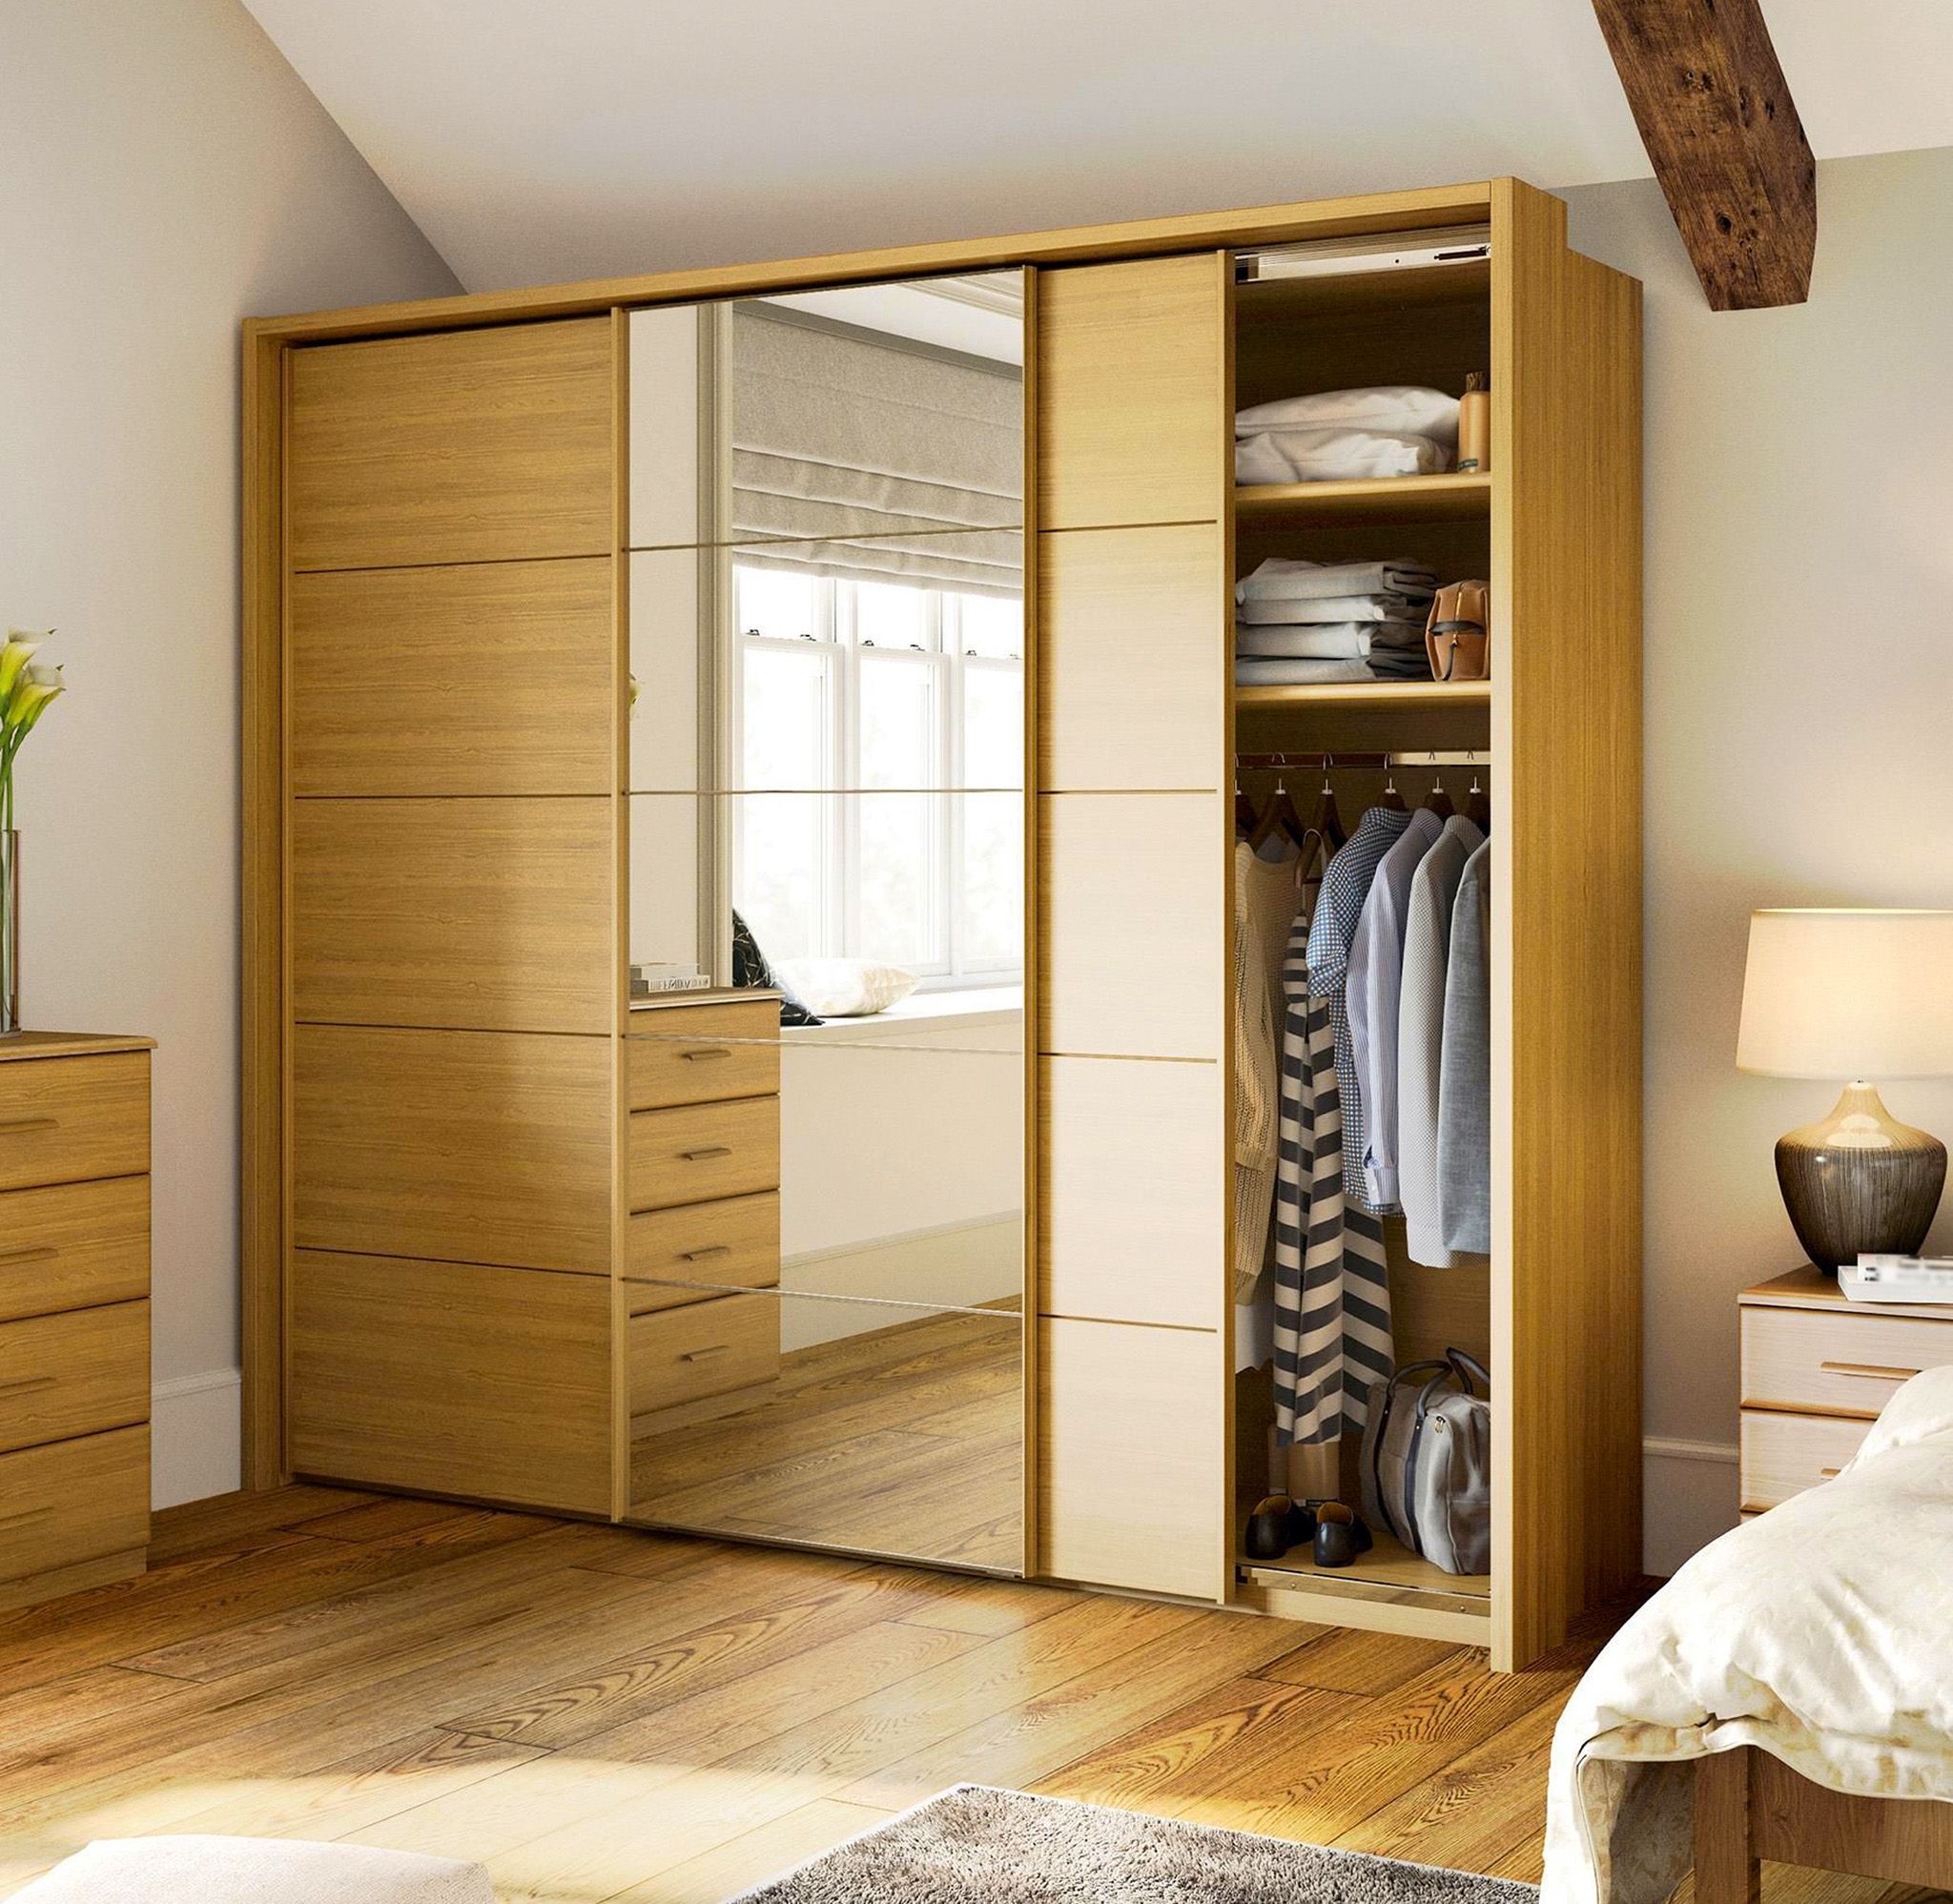 Fitted Wardrobes Ideas | Elegant Mirrored Wardrobe Designs Within Wardrobes With Mirror (View 15 of 15)